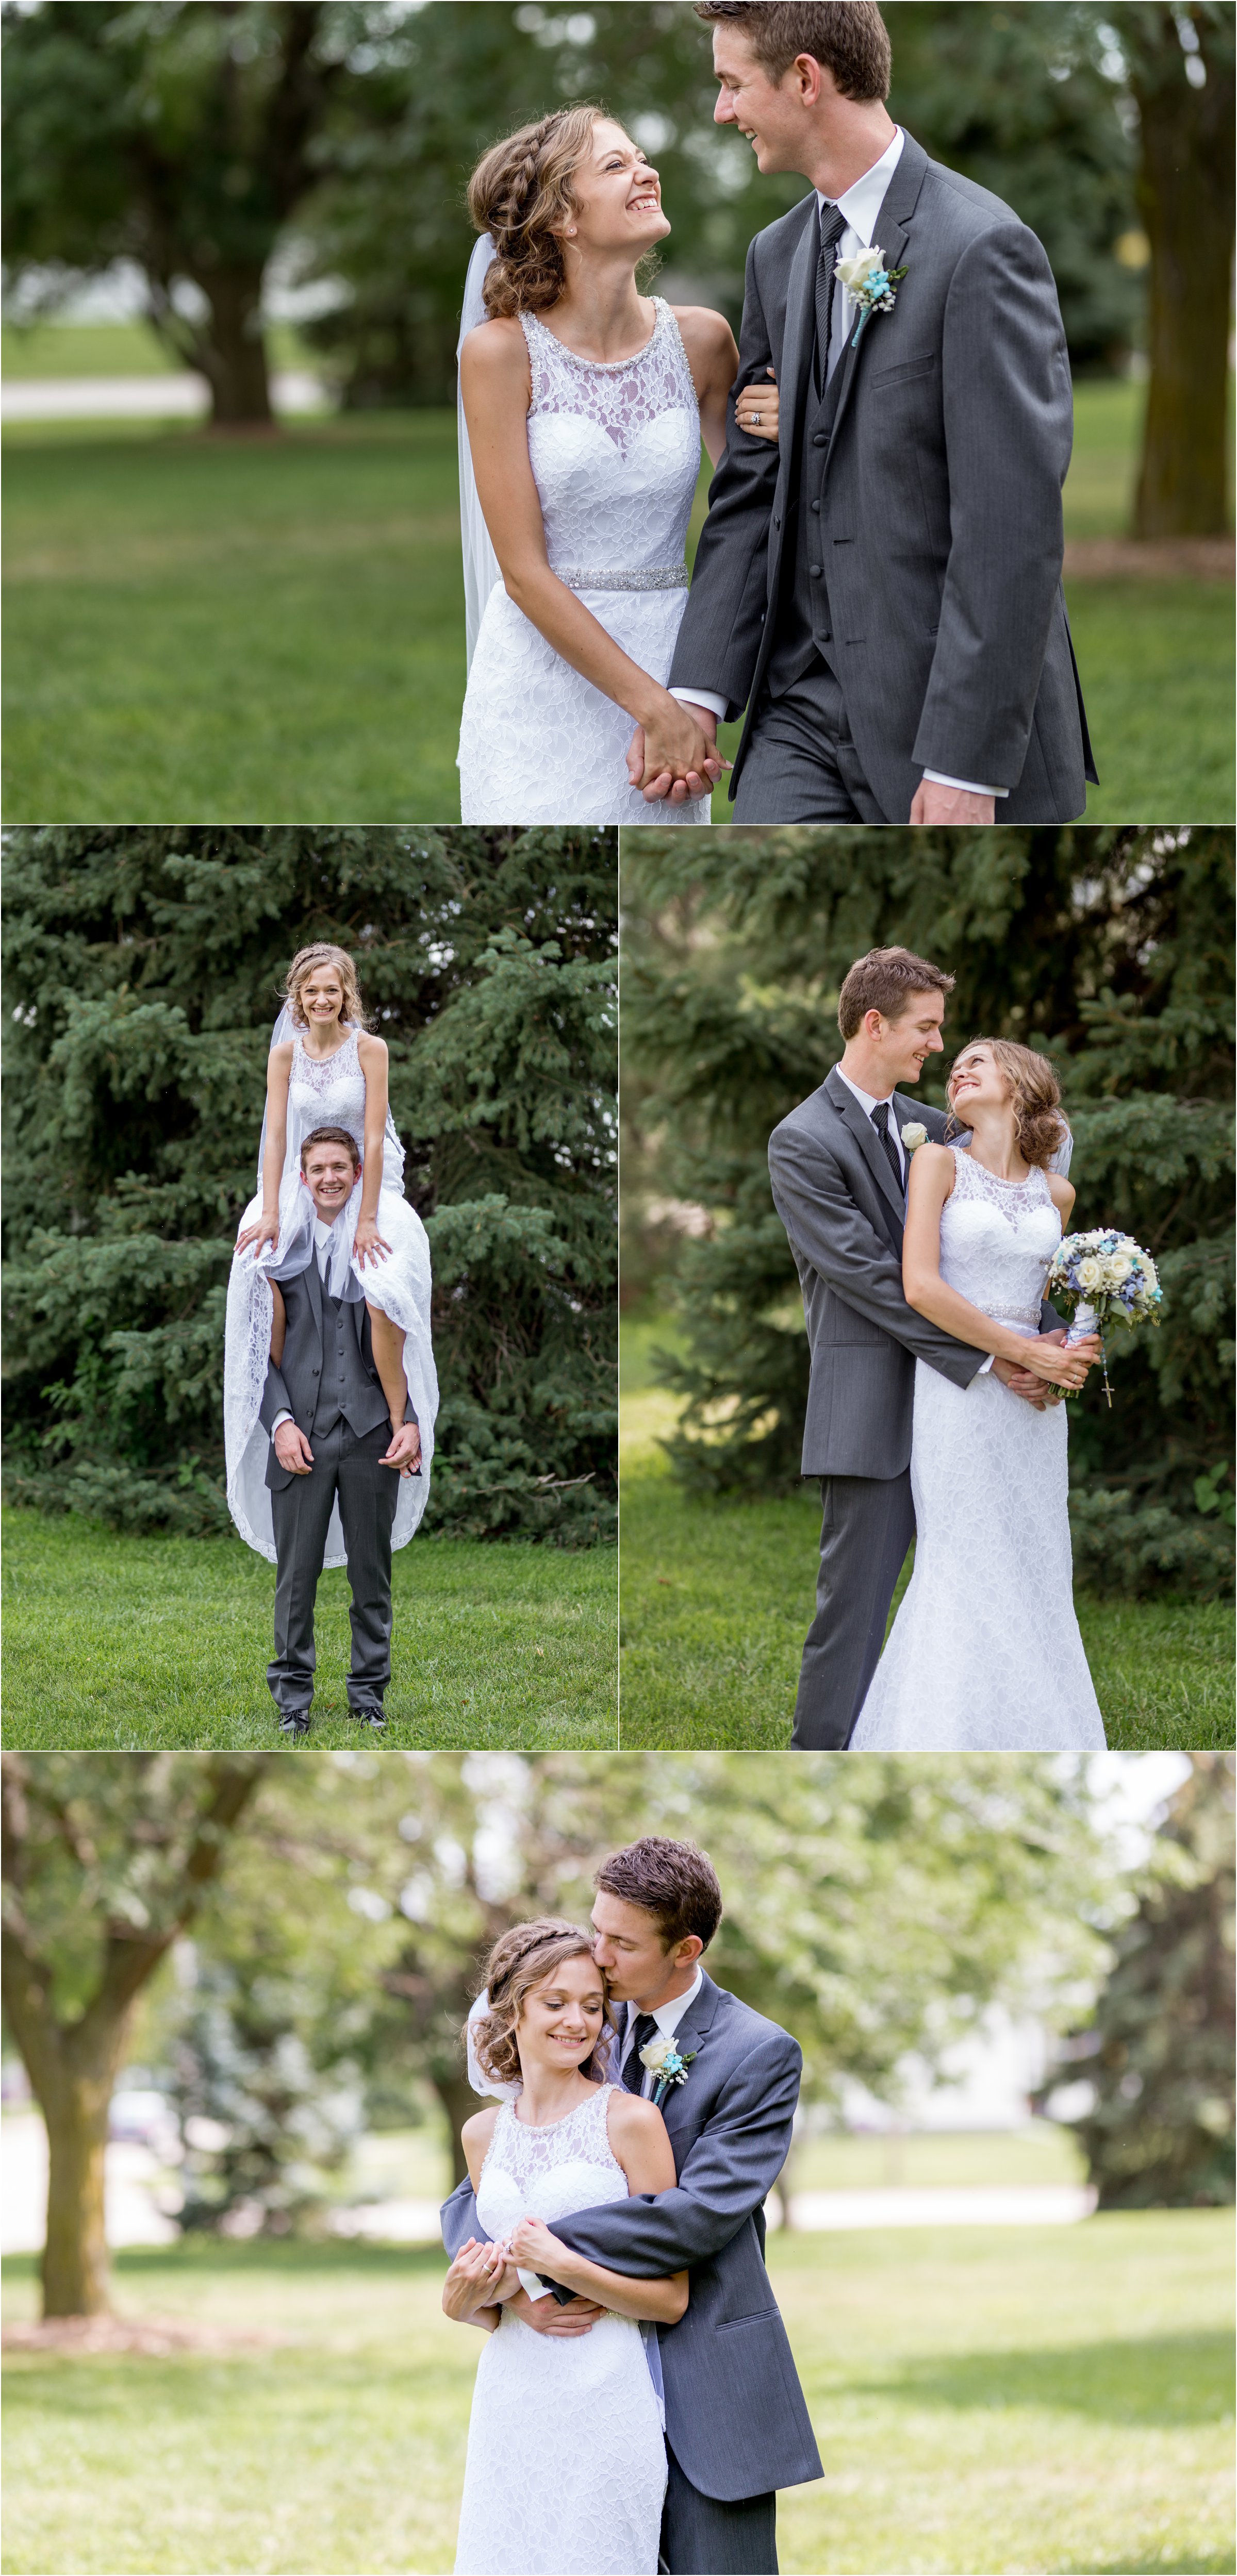 bride and groom laugh at one-another and pose for photos together